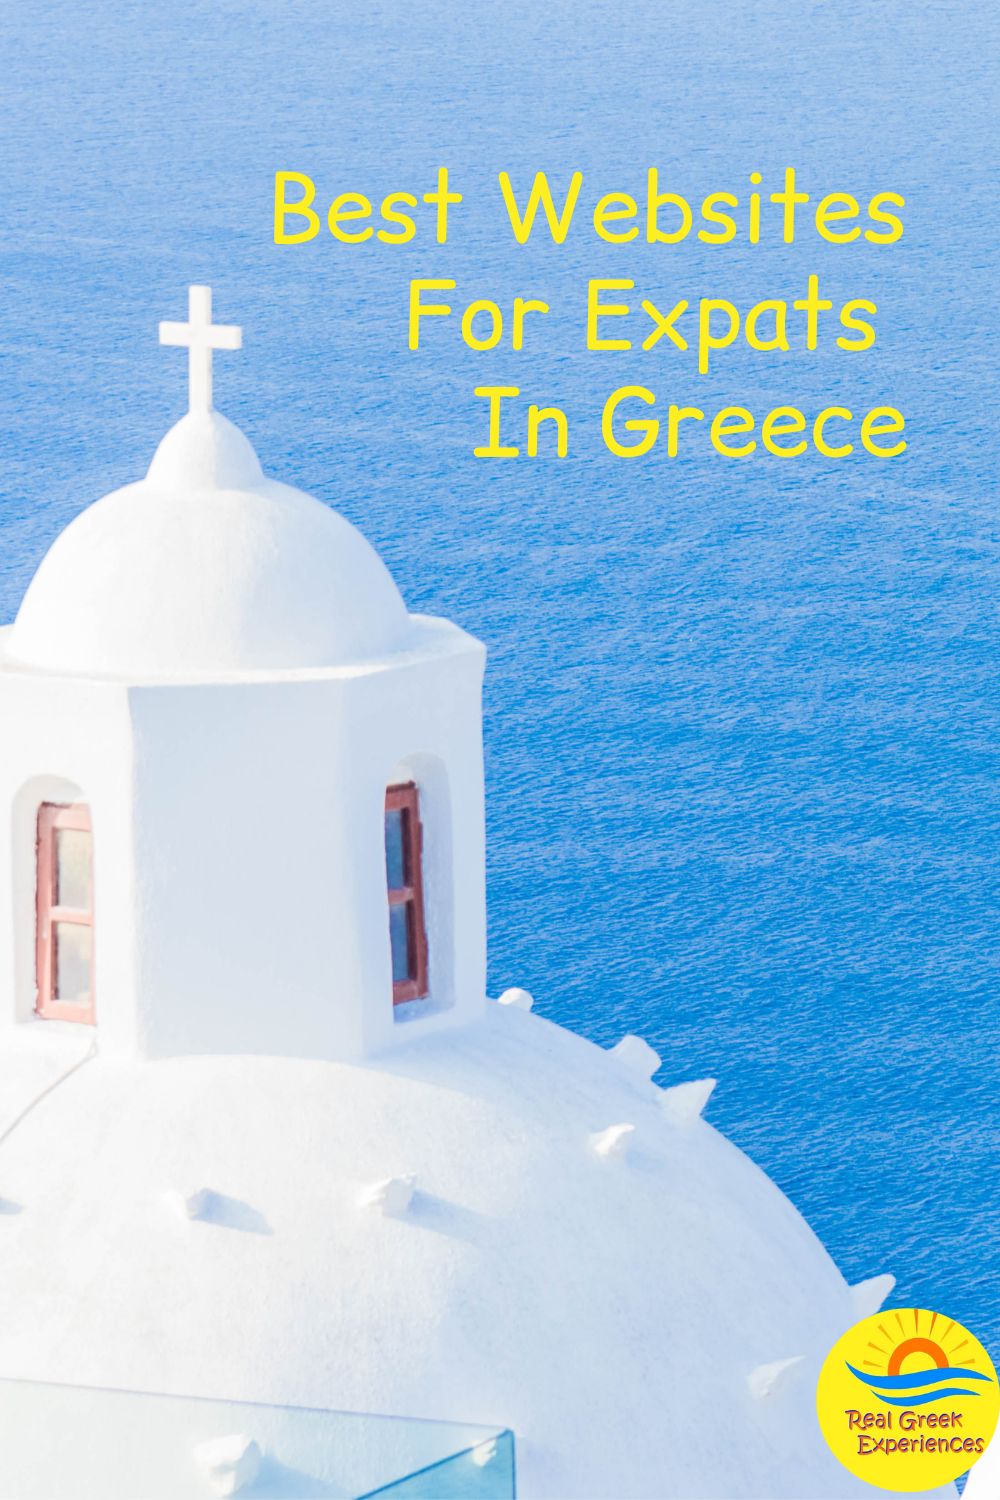 Websites for expats in Greece